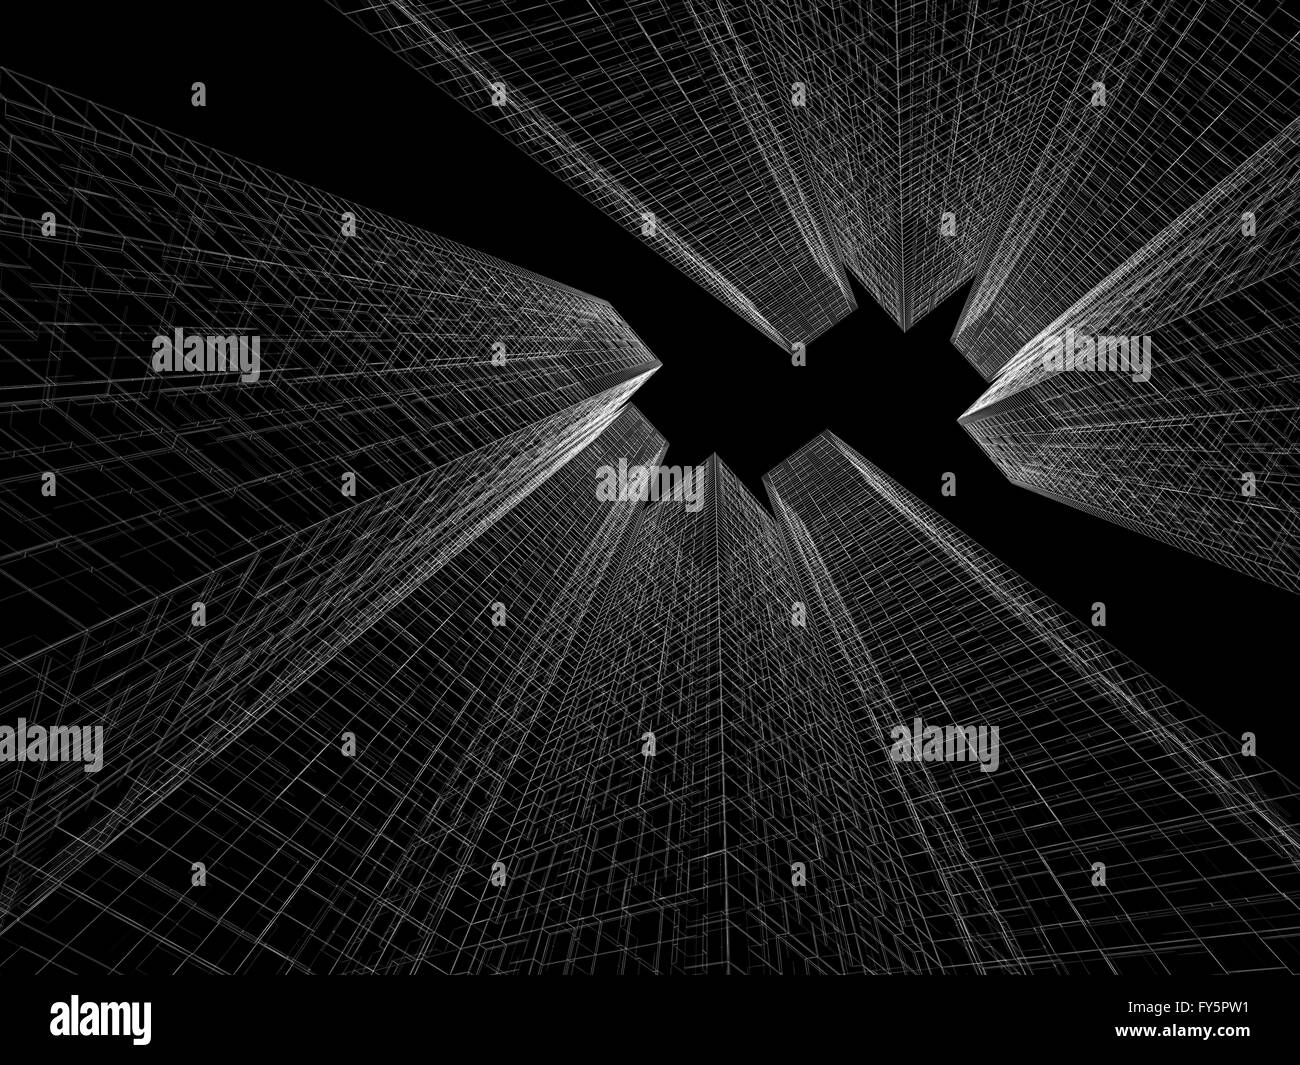 Abstract digital graphic background. Modern skyscrapers perspective. White wire frame lines over black background. 3d render Stock Photo